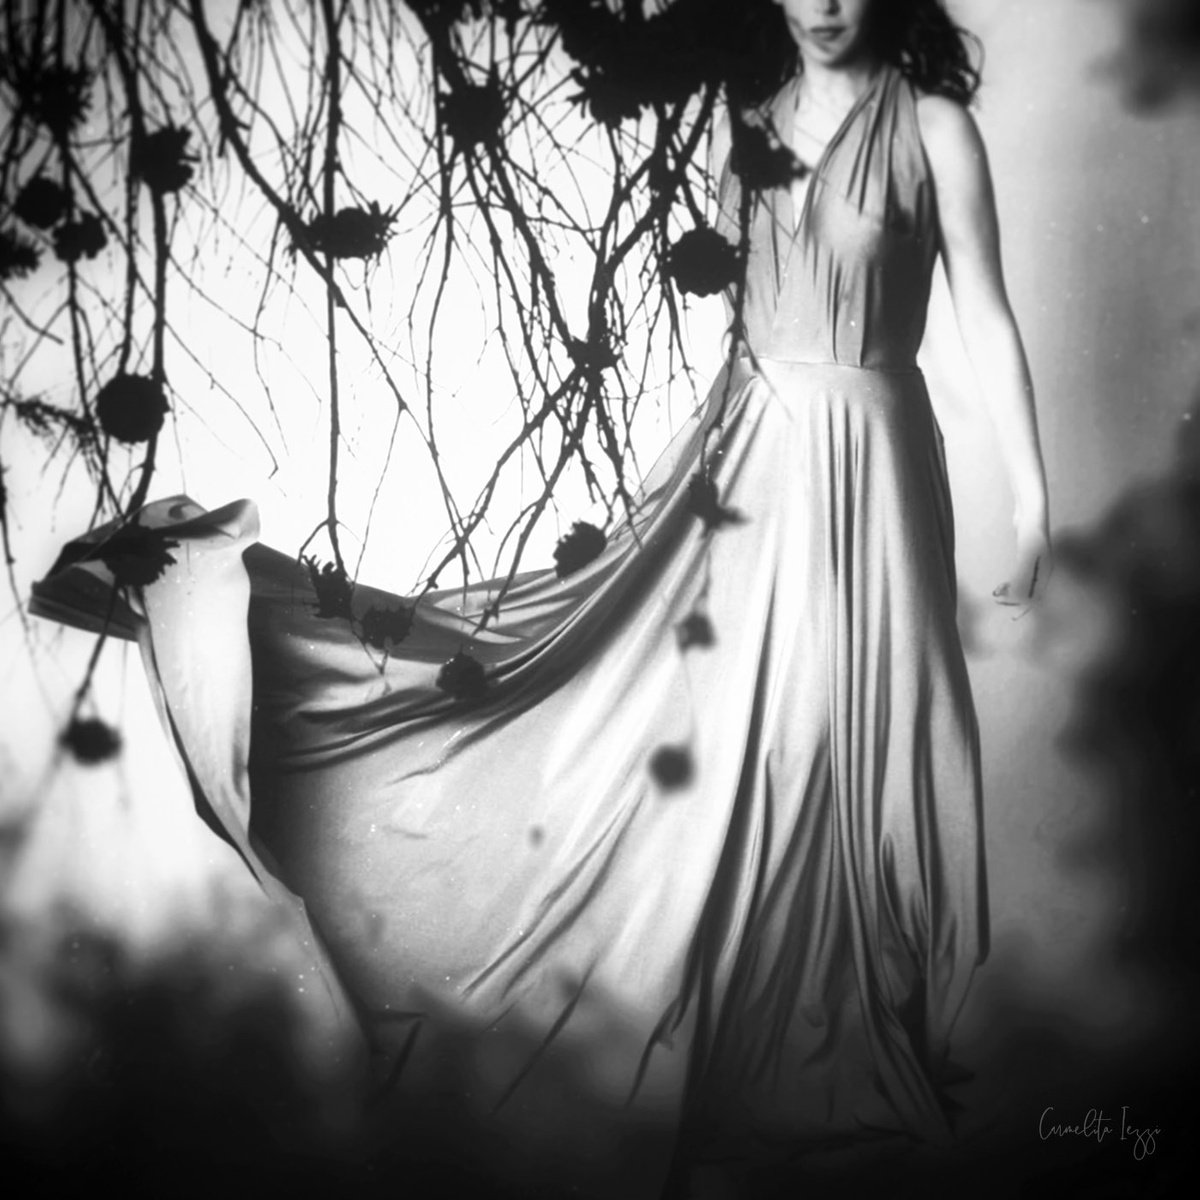 The wind song - Photography - Surreal - Portrait - Manipulated by Carmelita Iezzi